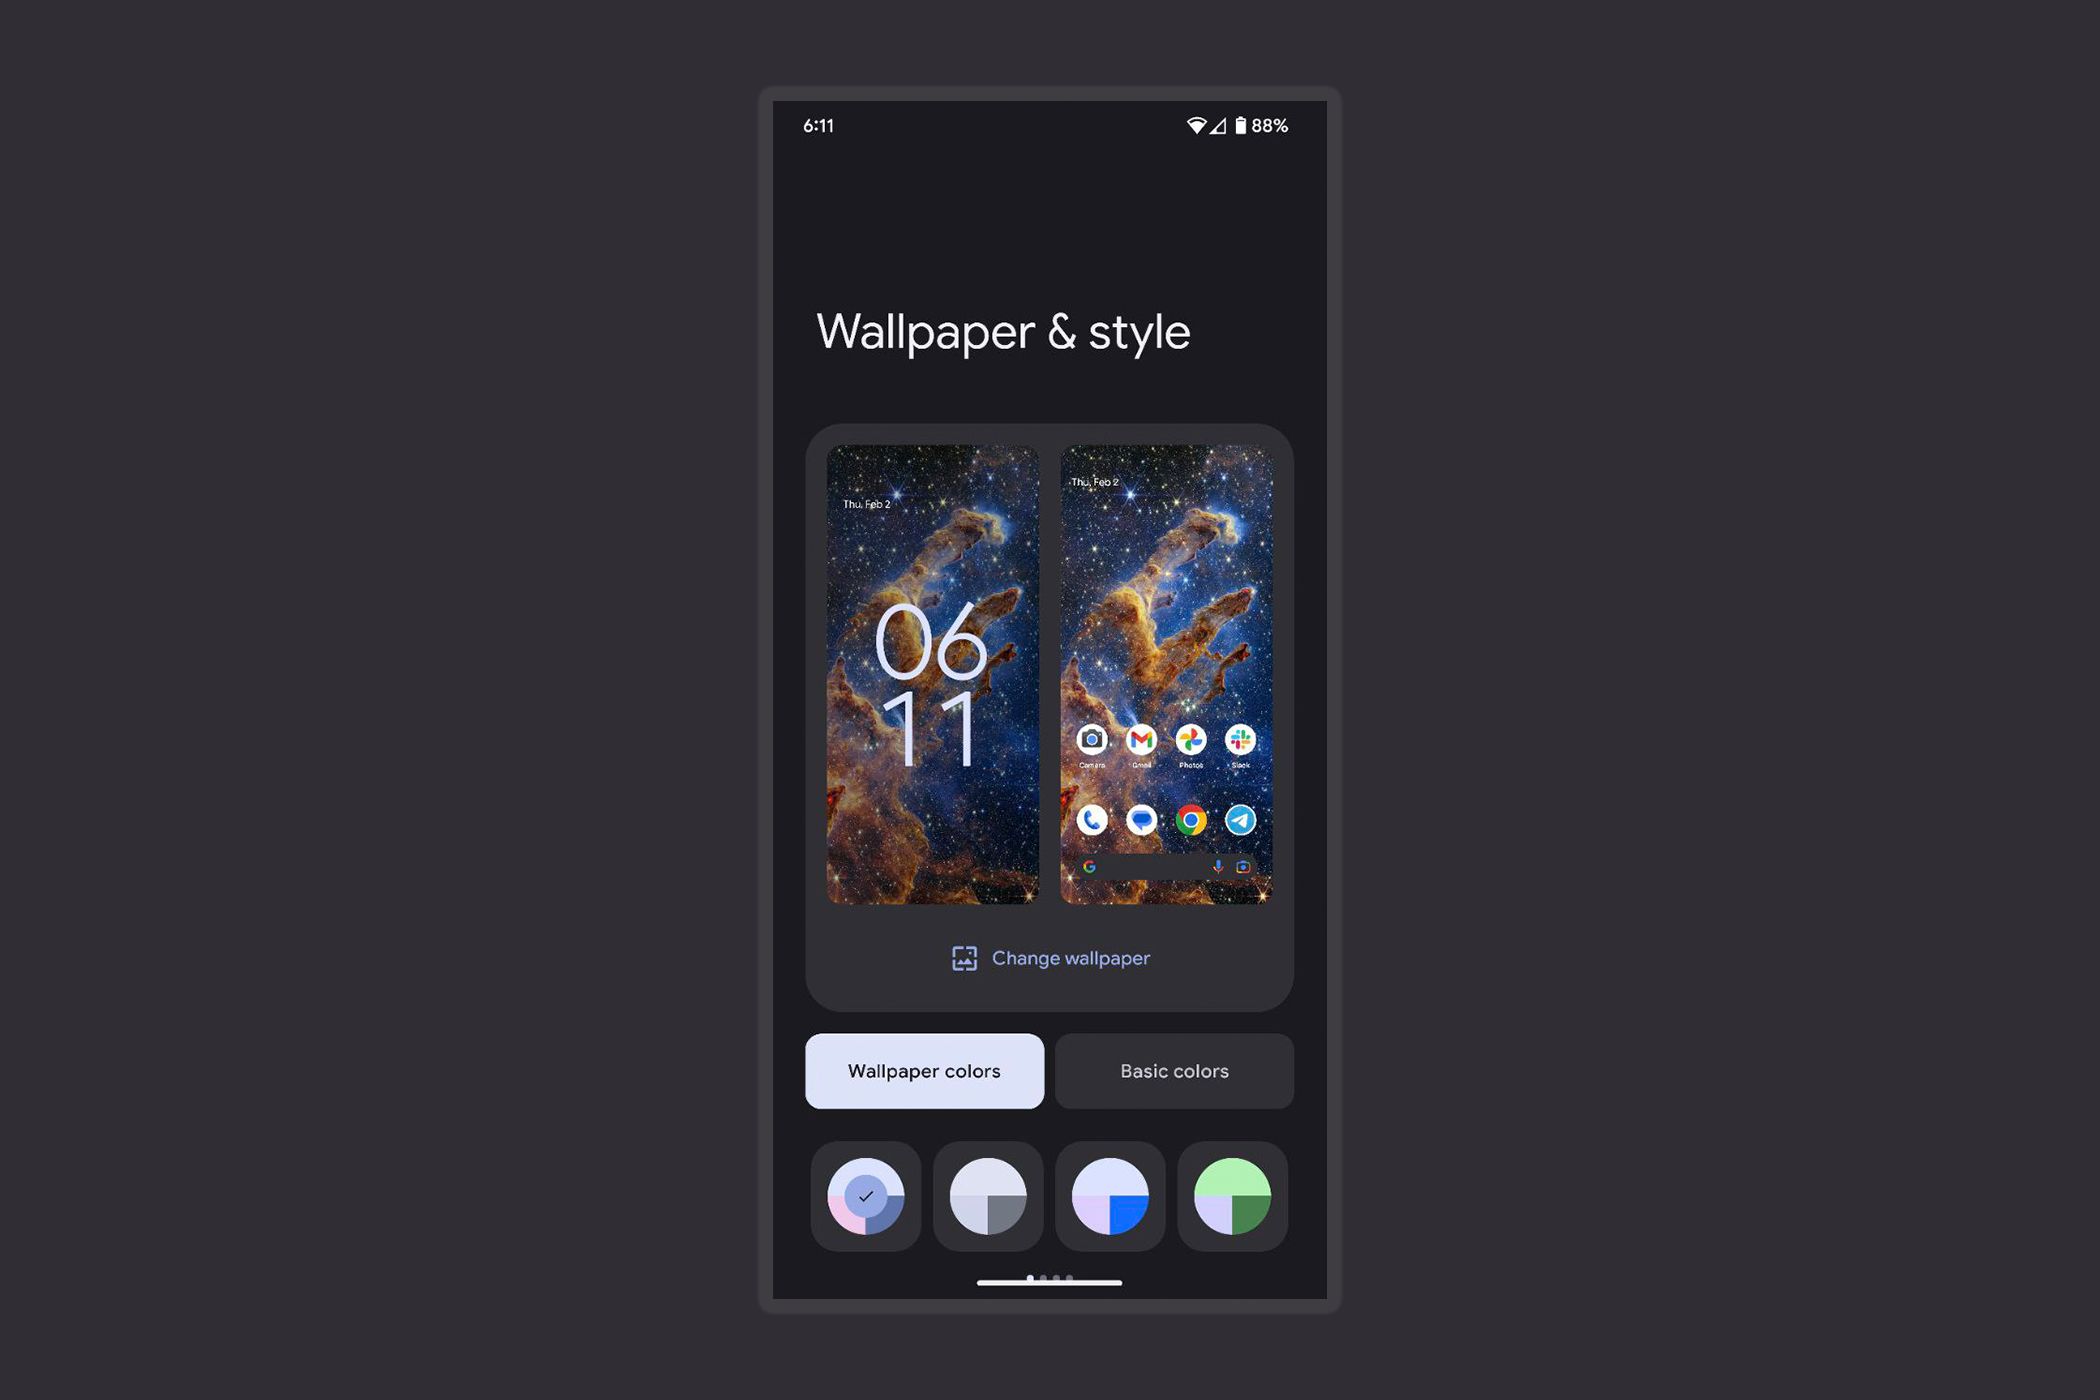 Pixel's Wallpaper & style app is getting a UI refresh